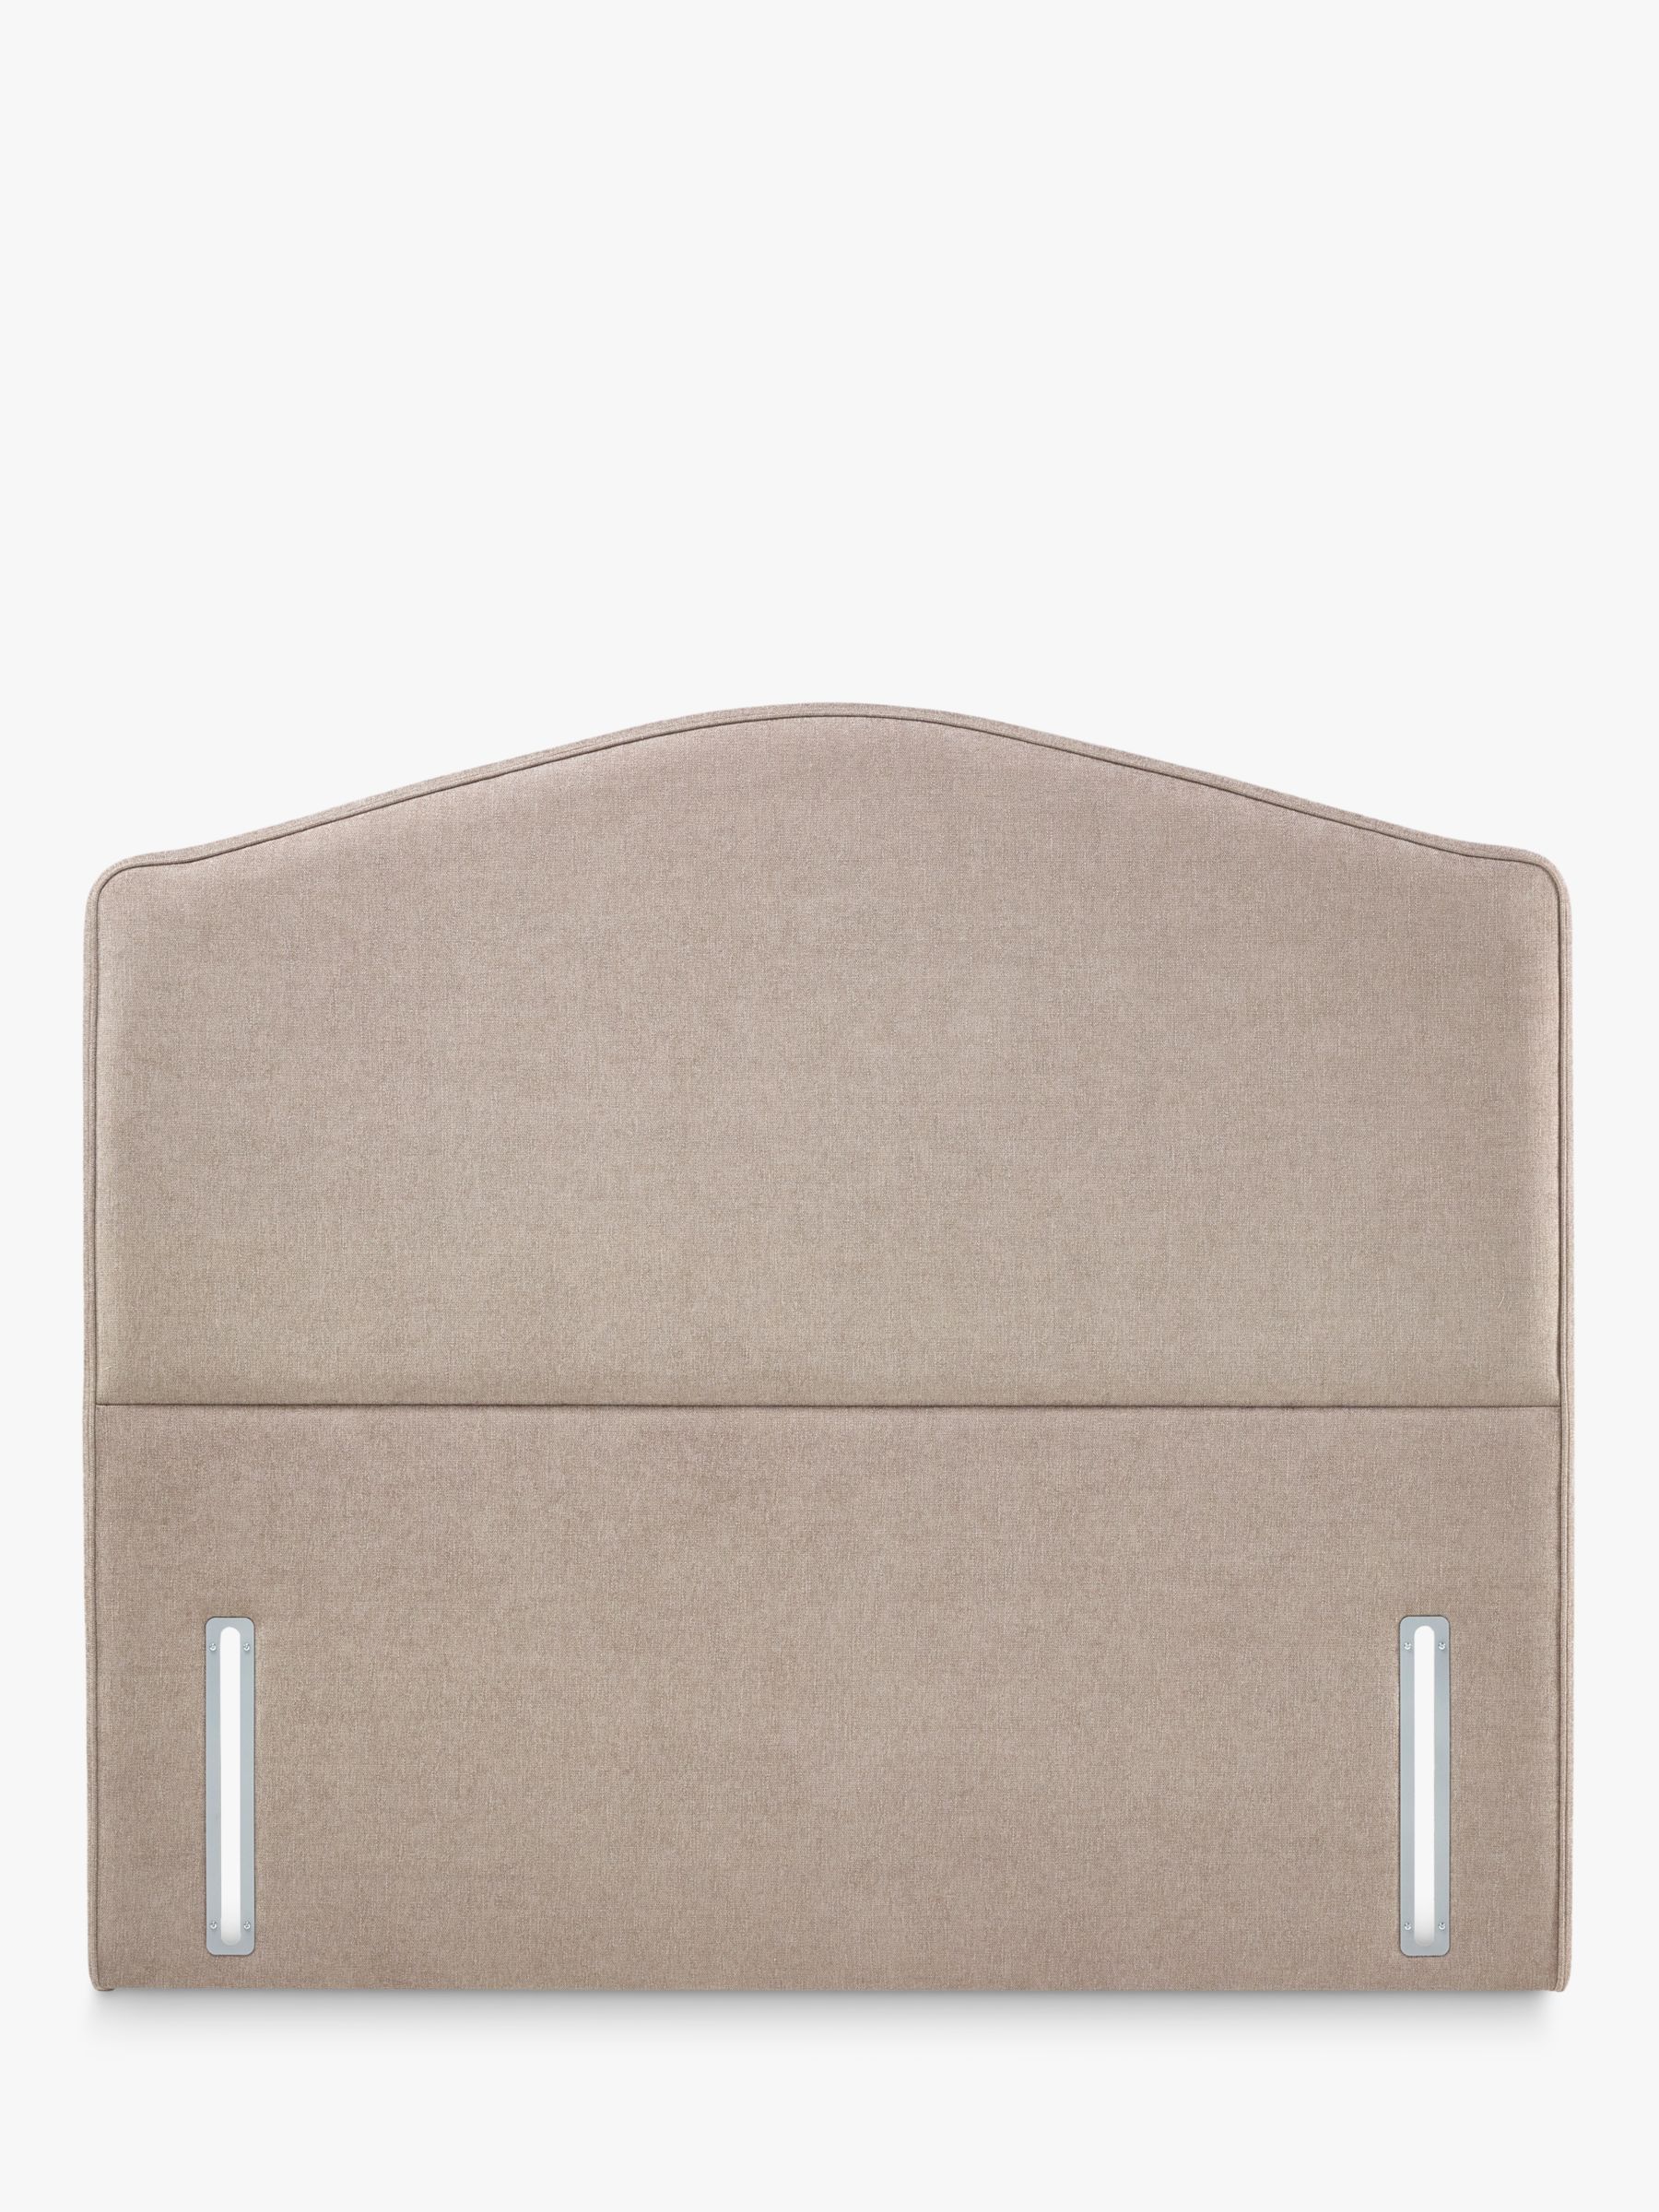 Photo of John lewis natural collection richmond upholstered headboard double soft touch chenille mole